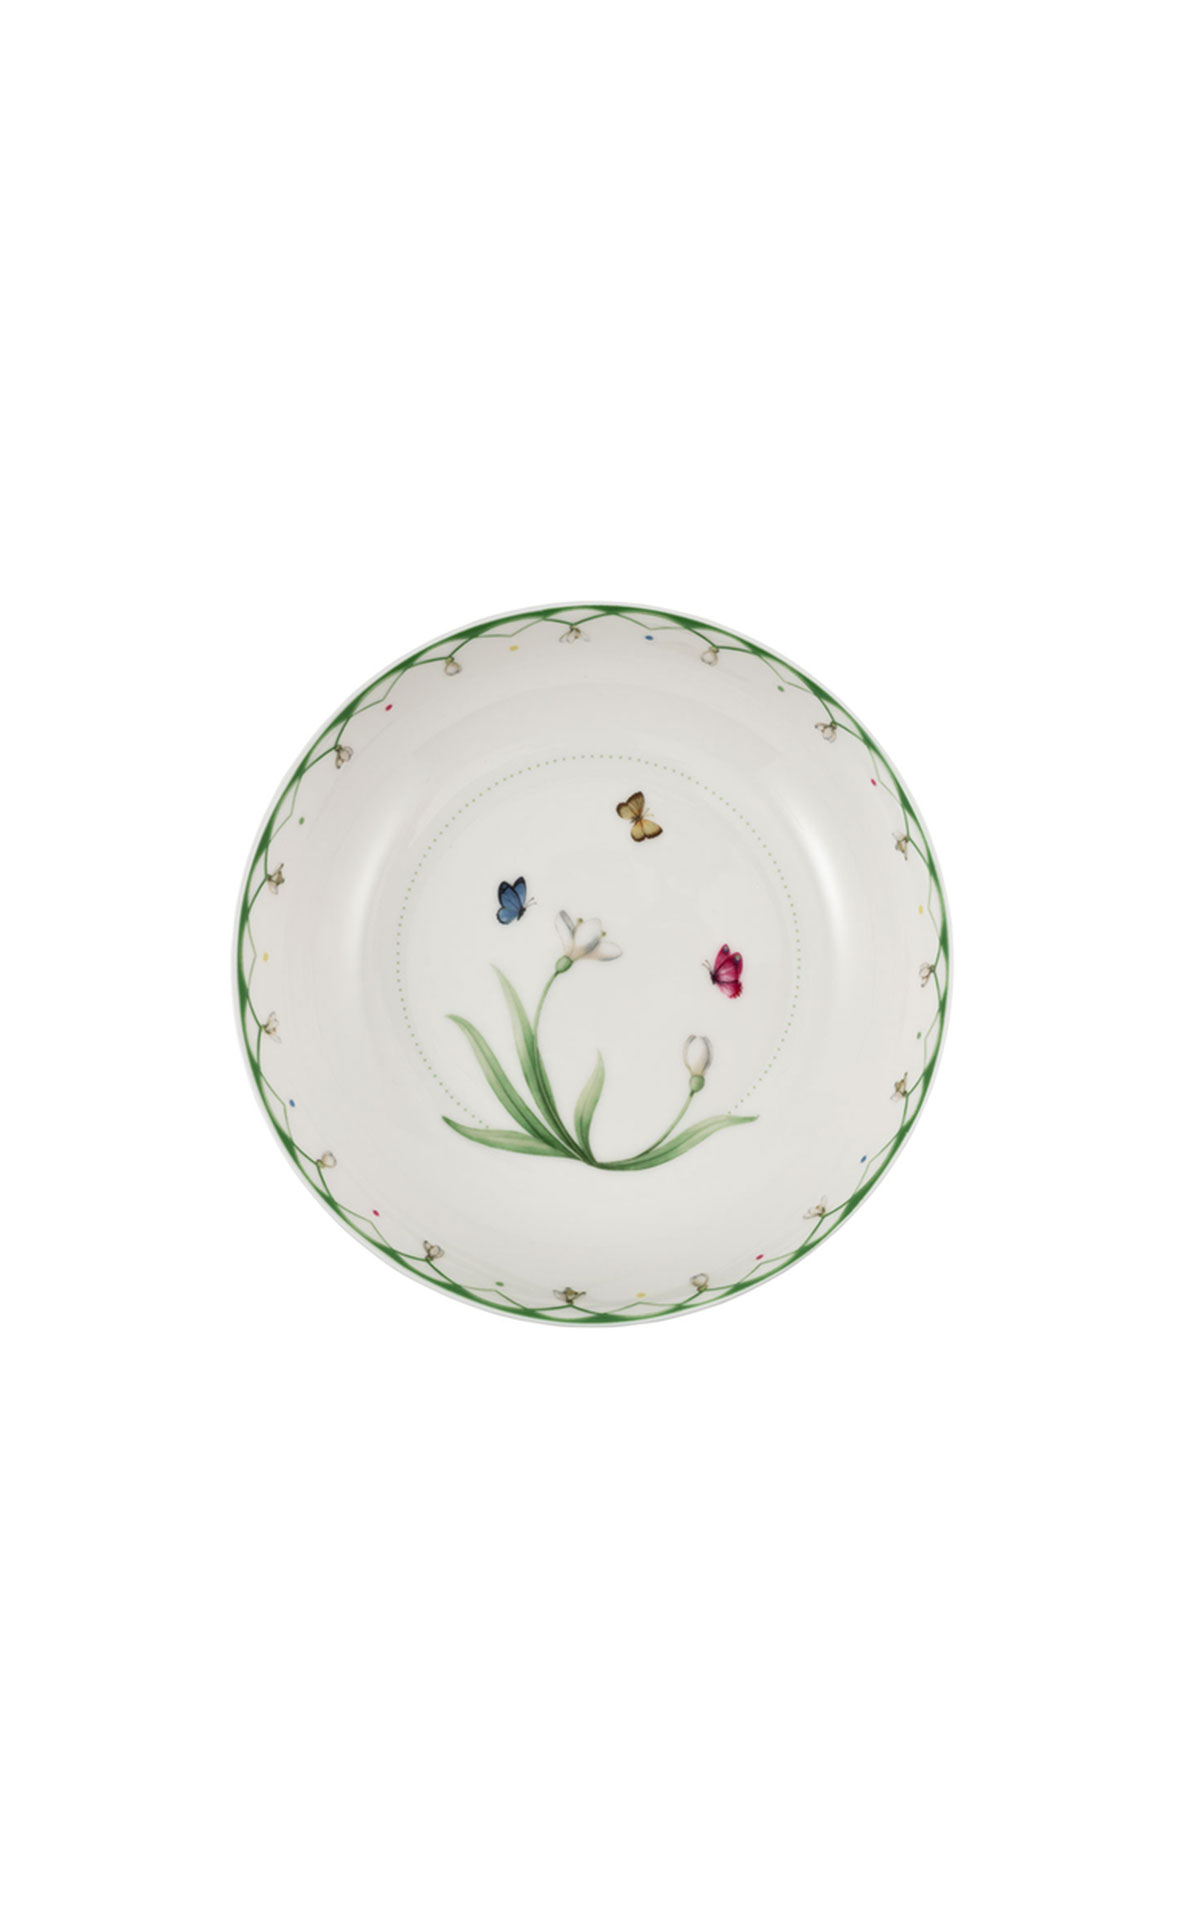 Villeroy and Boch Colourful spring salad plate from Bicester Village